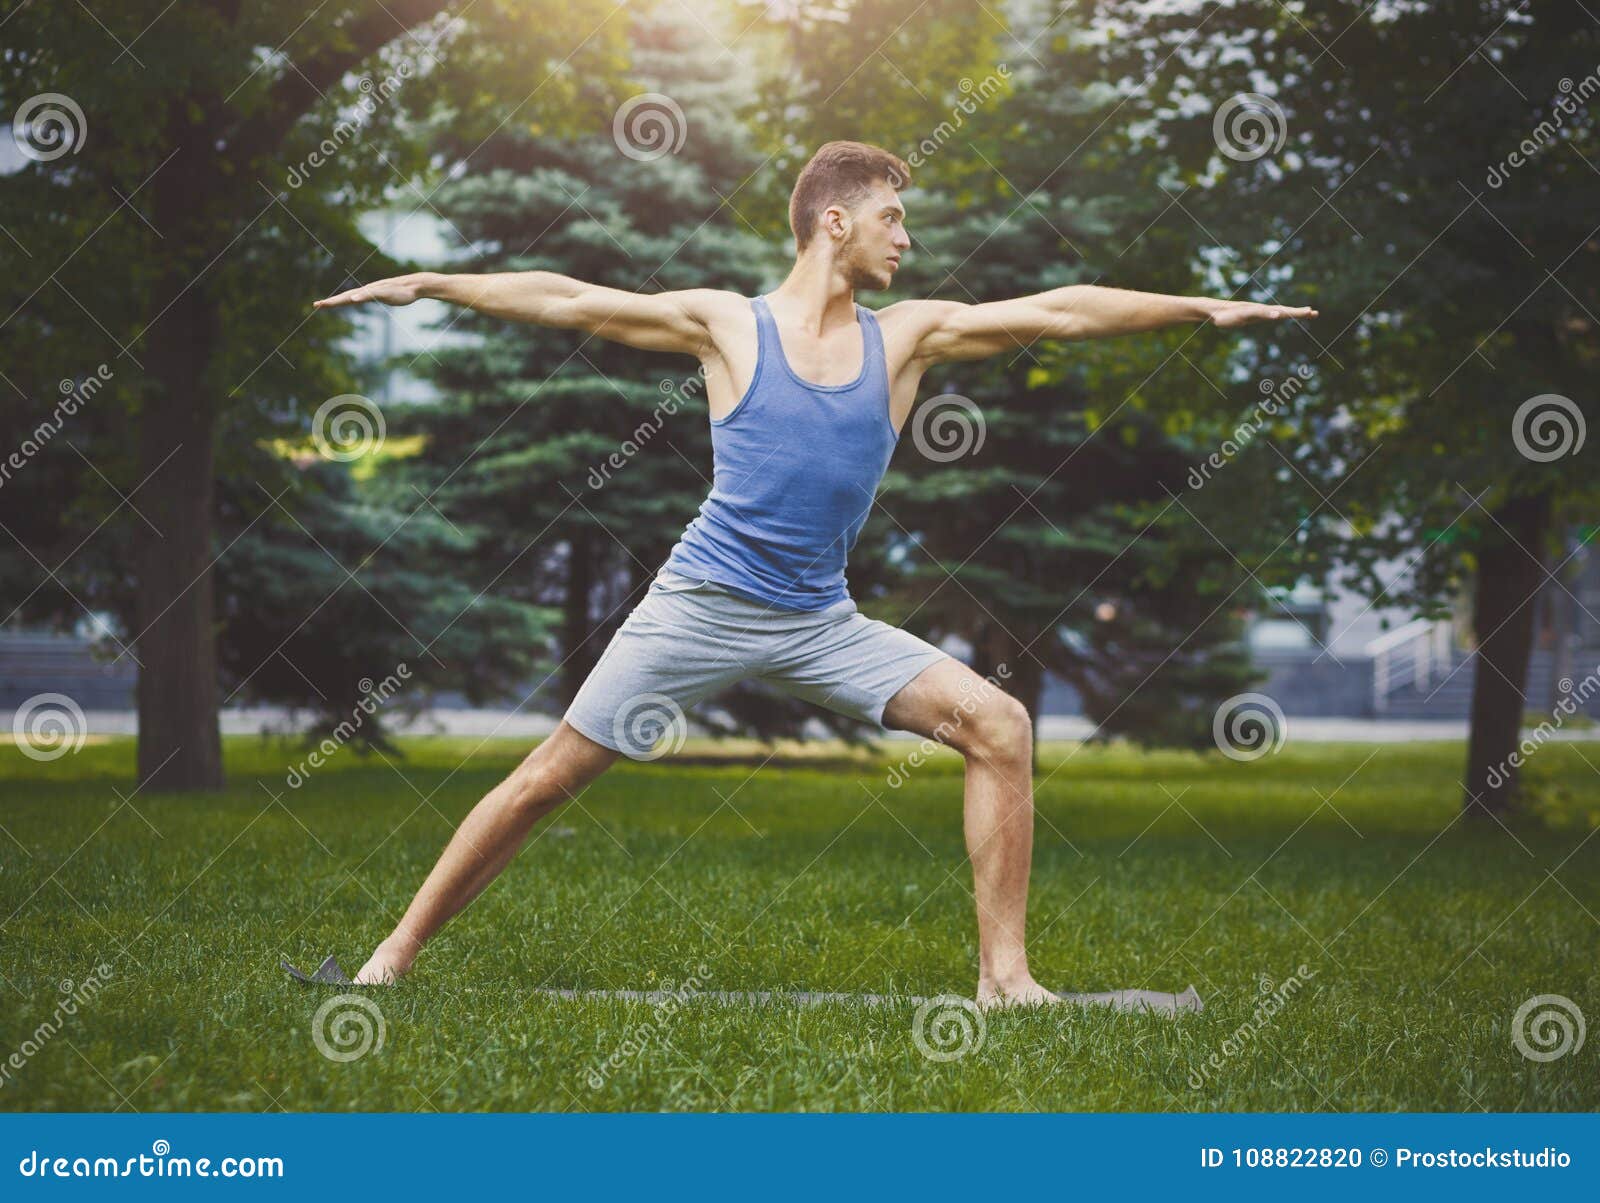 Fitness Man Warm Up Stretching Training Outdoors Stock Photo - Image of ...